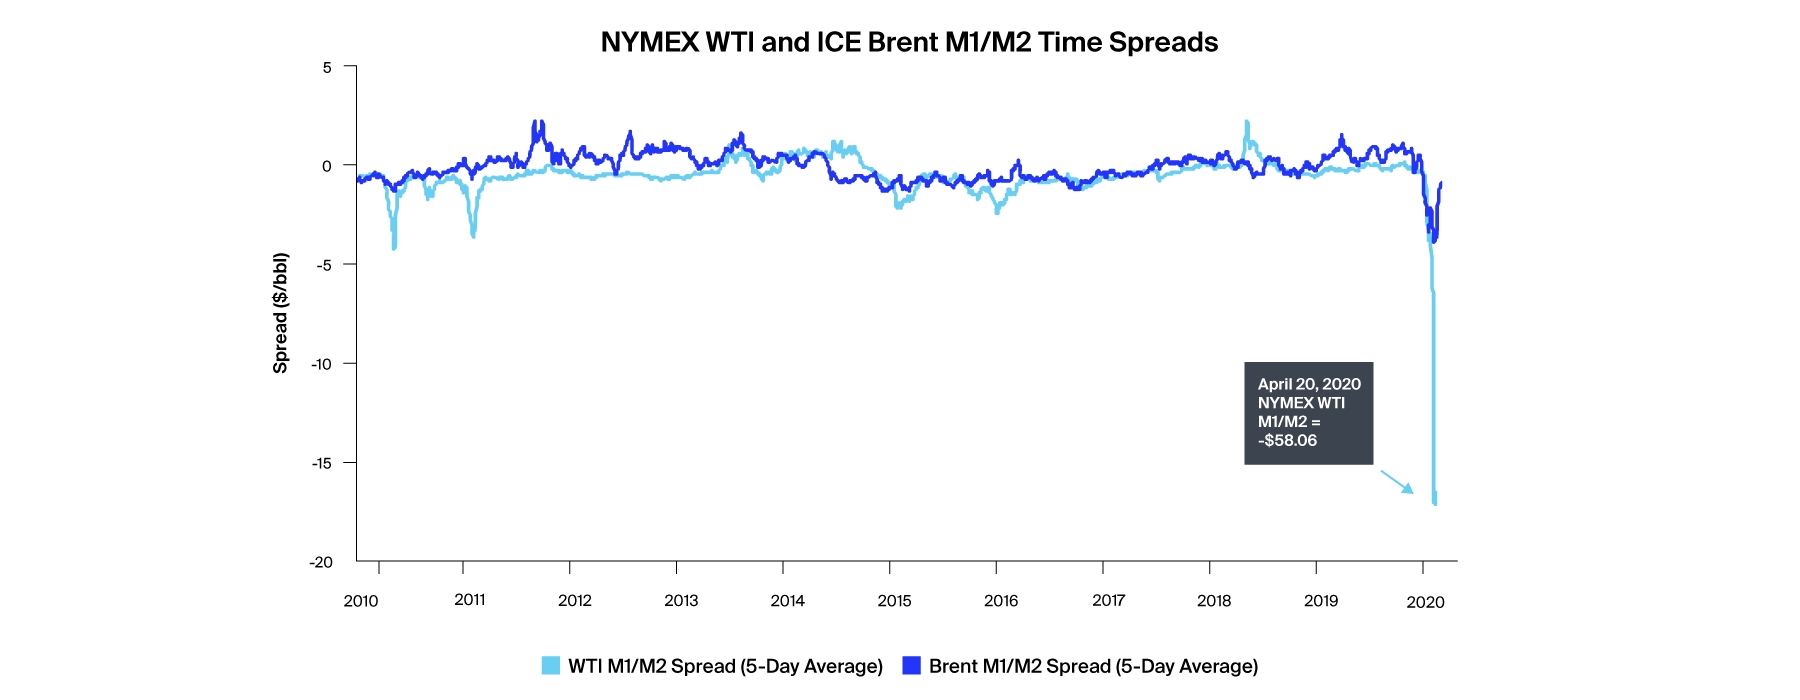 What Are The Differences Between Ice Brent And Nymex Wti